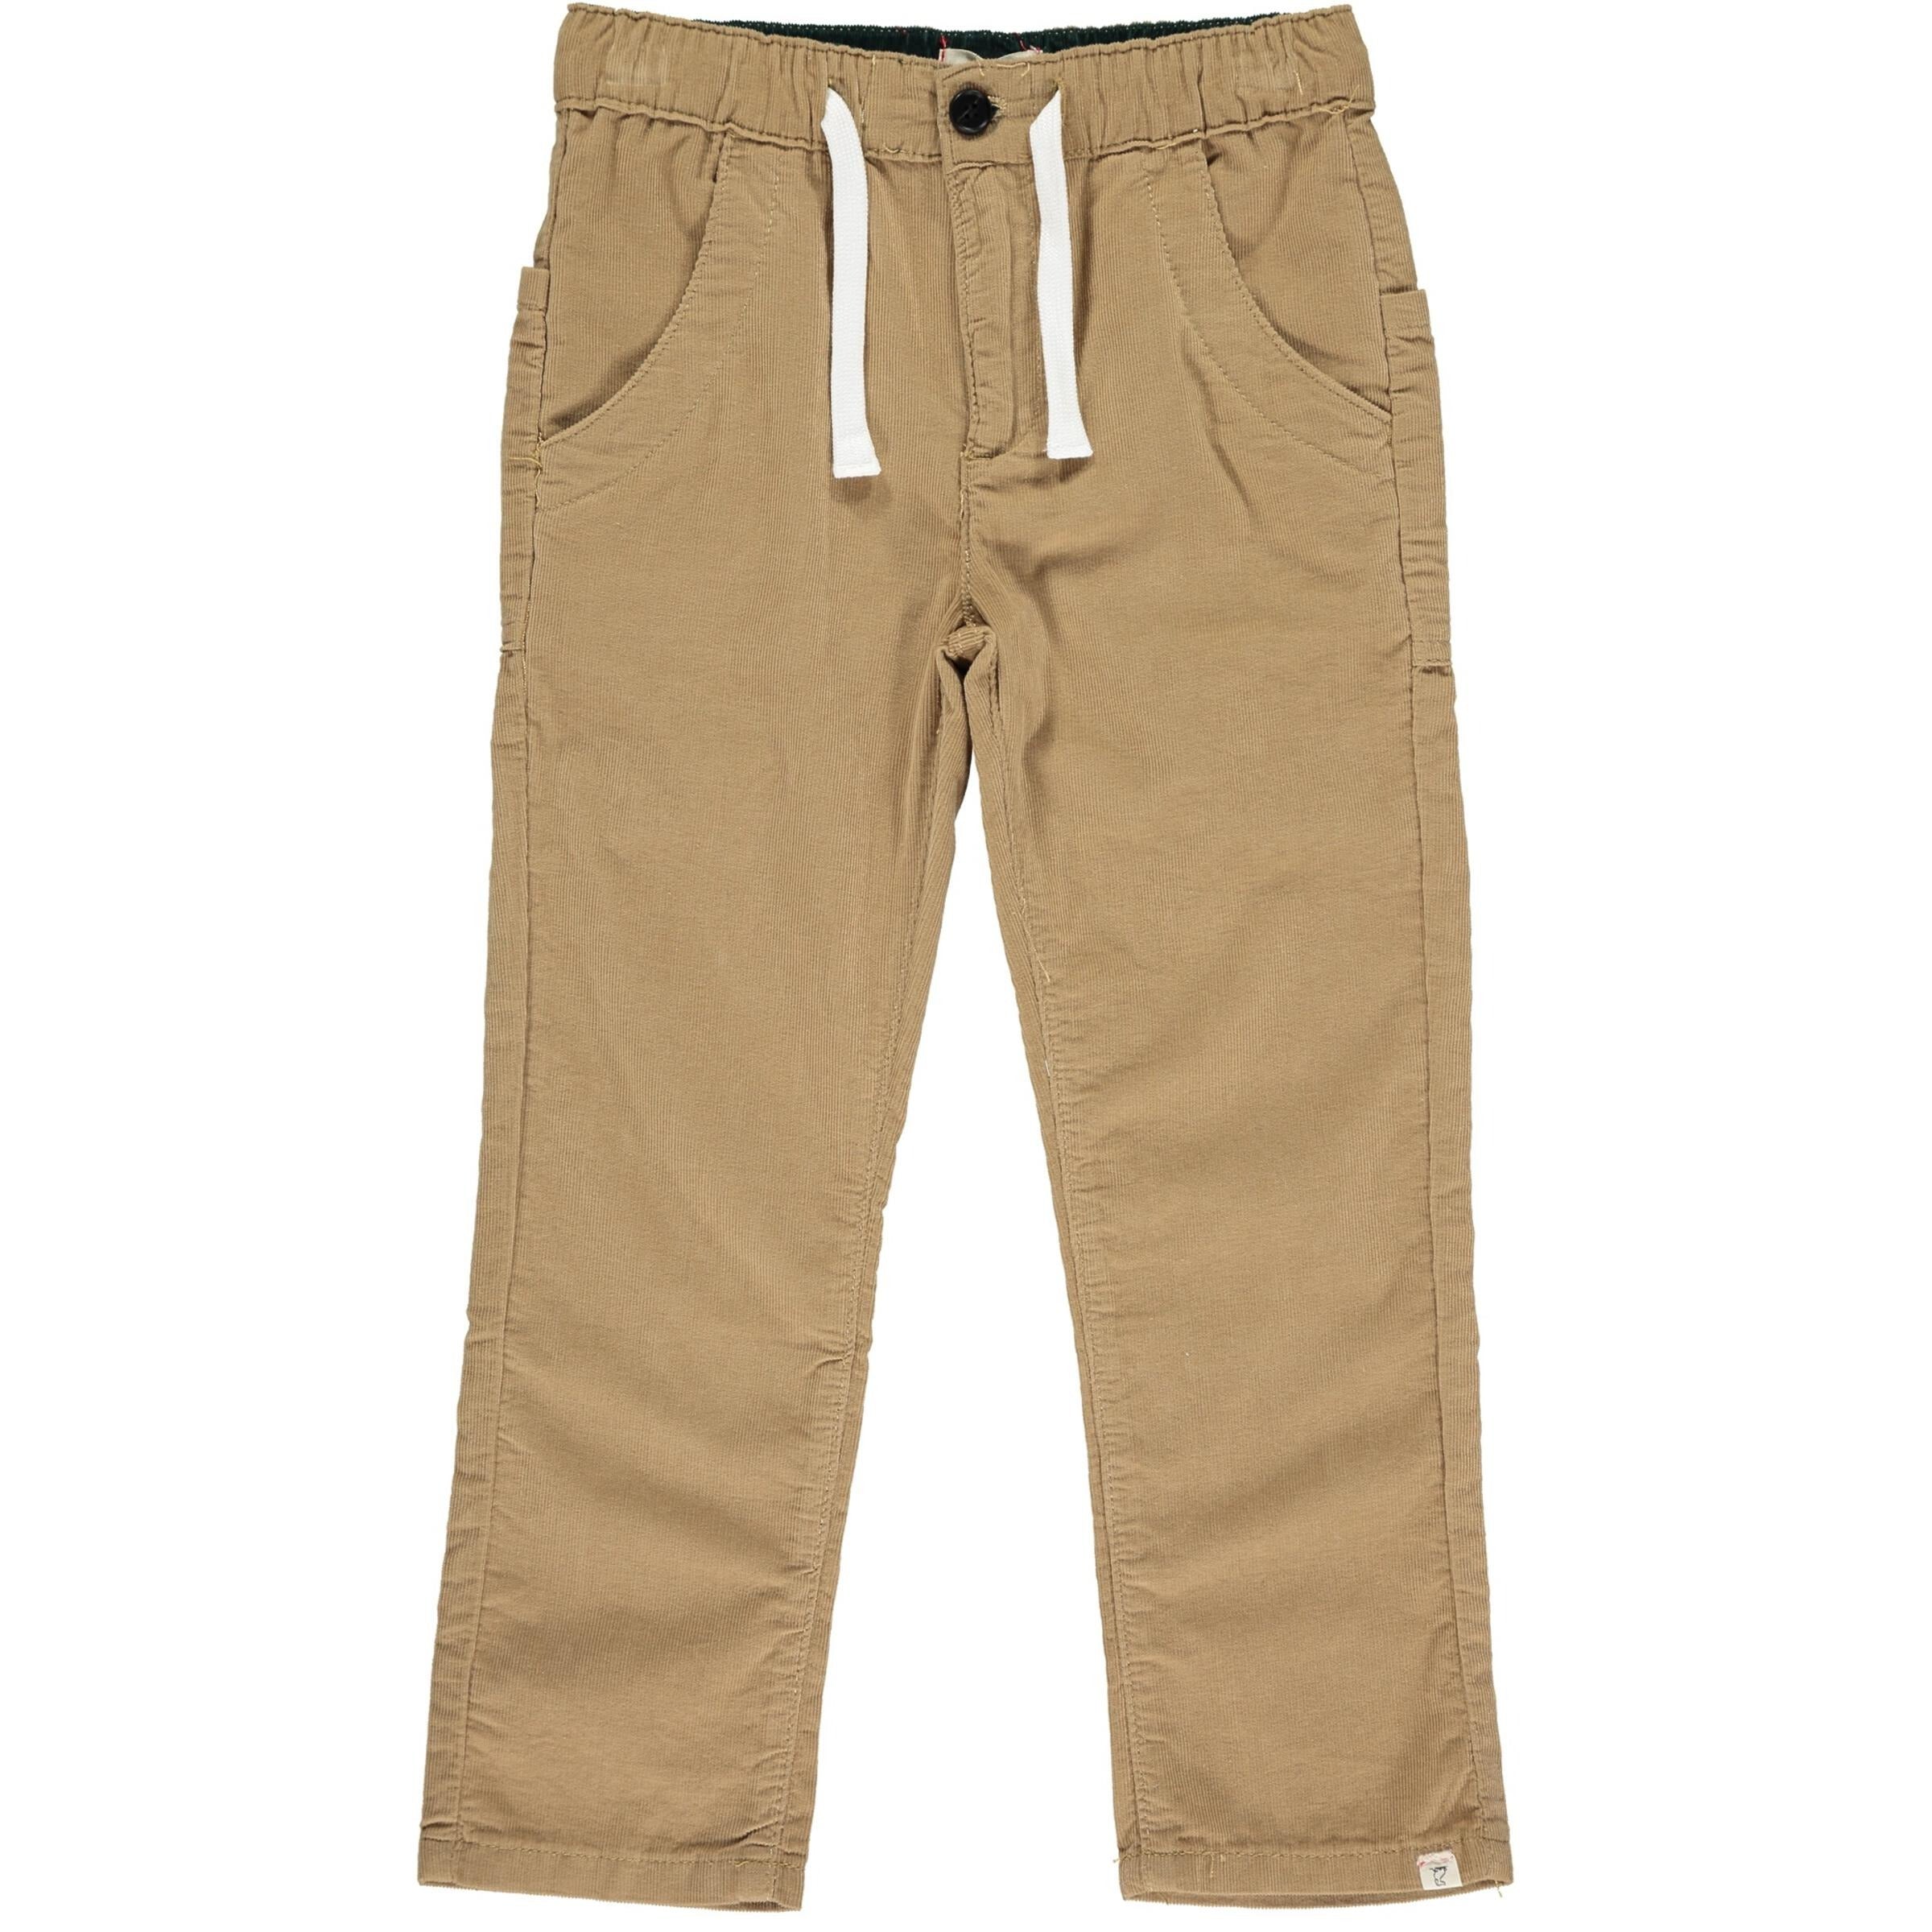 light brown corduroy pants with white drawstring elastic waistband and button closure